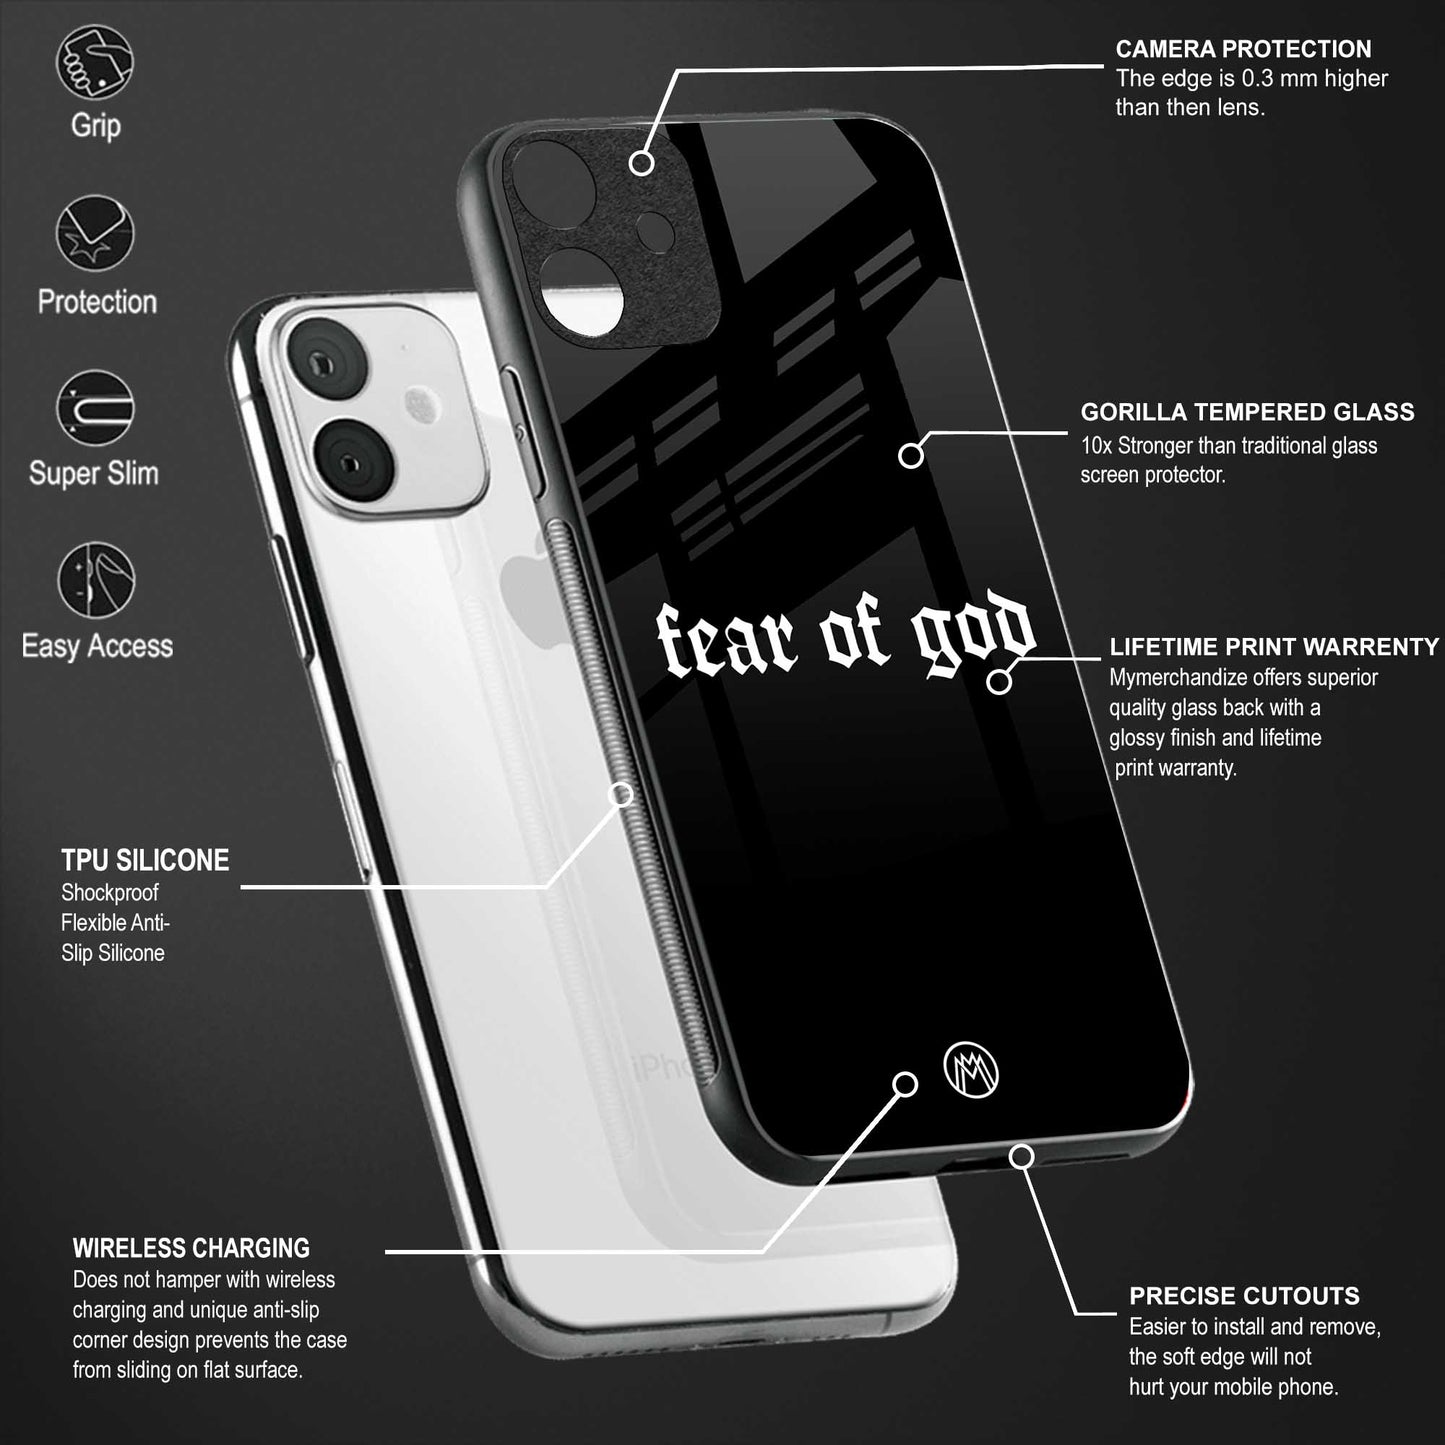 fear of god phone cover for samsung galaxy m10s